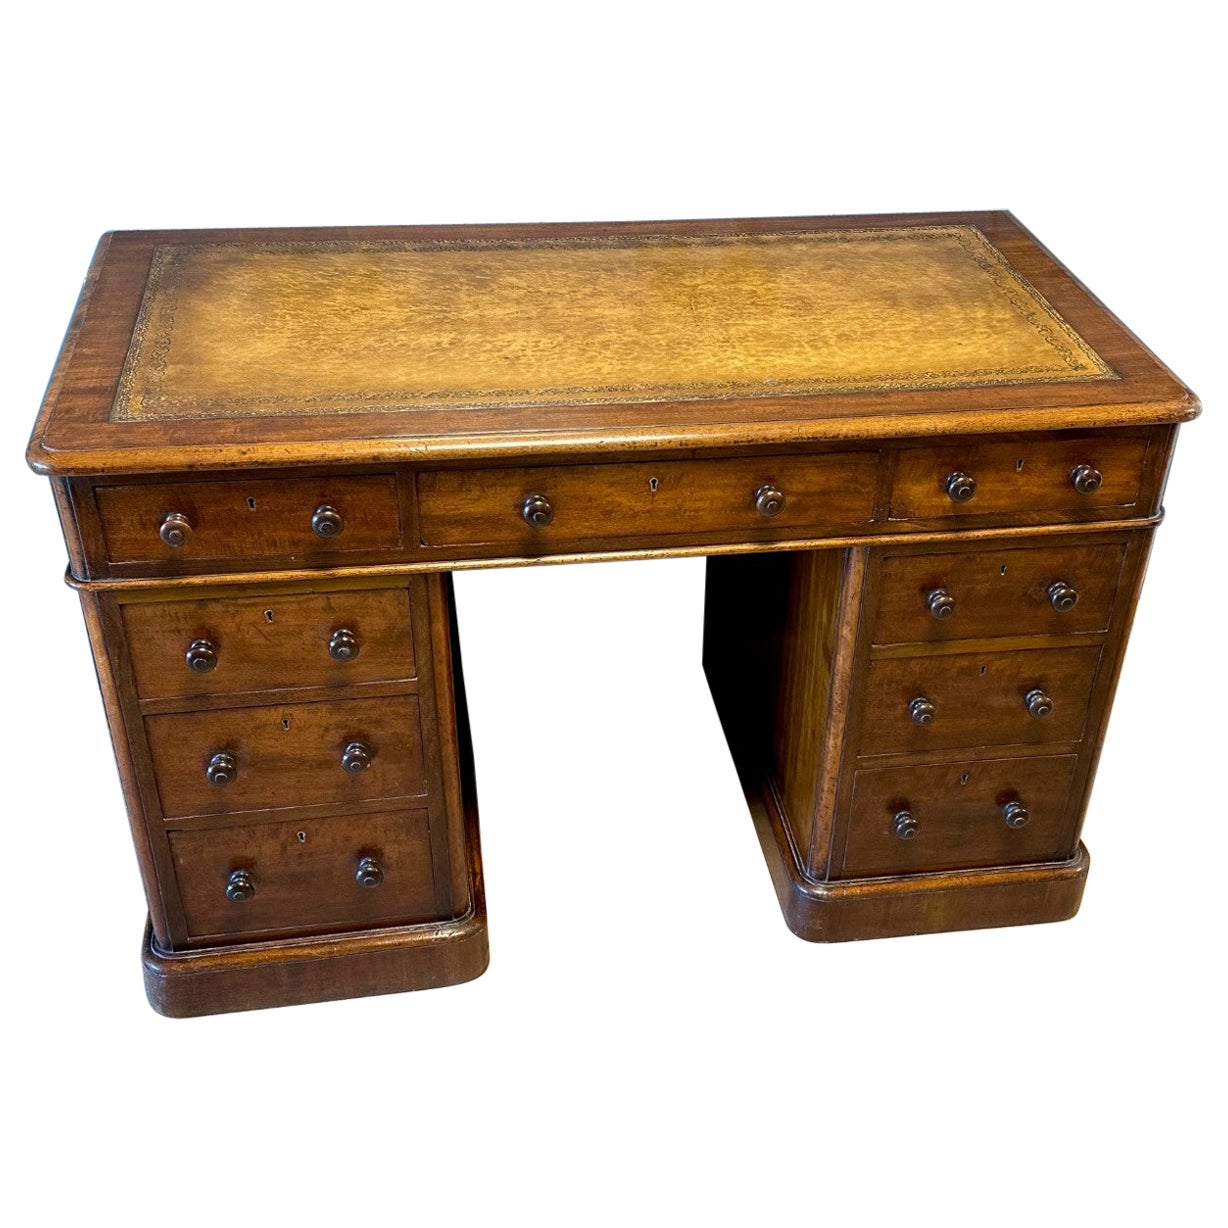 Antique Desk from maker Maple & Co For Sale